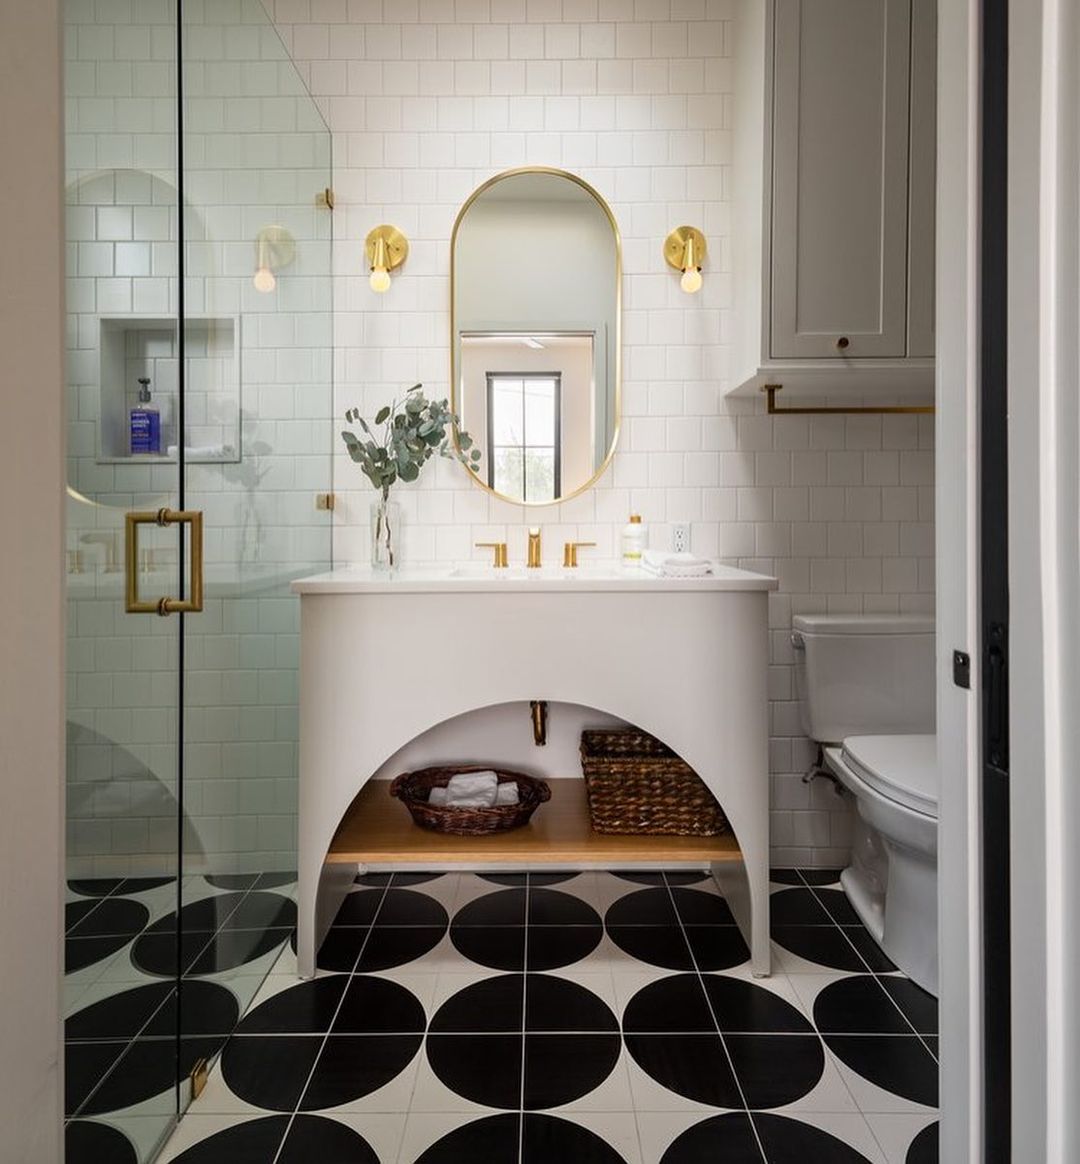 Modern bathroom design with black and white tiles